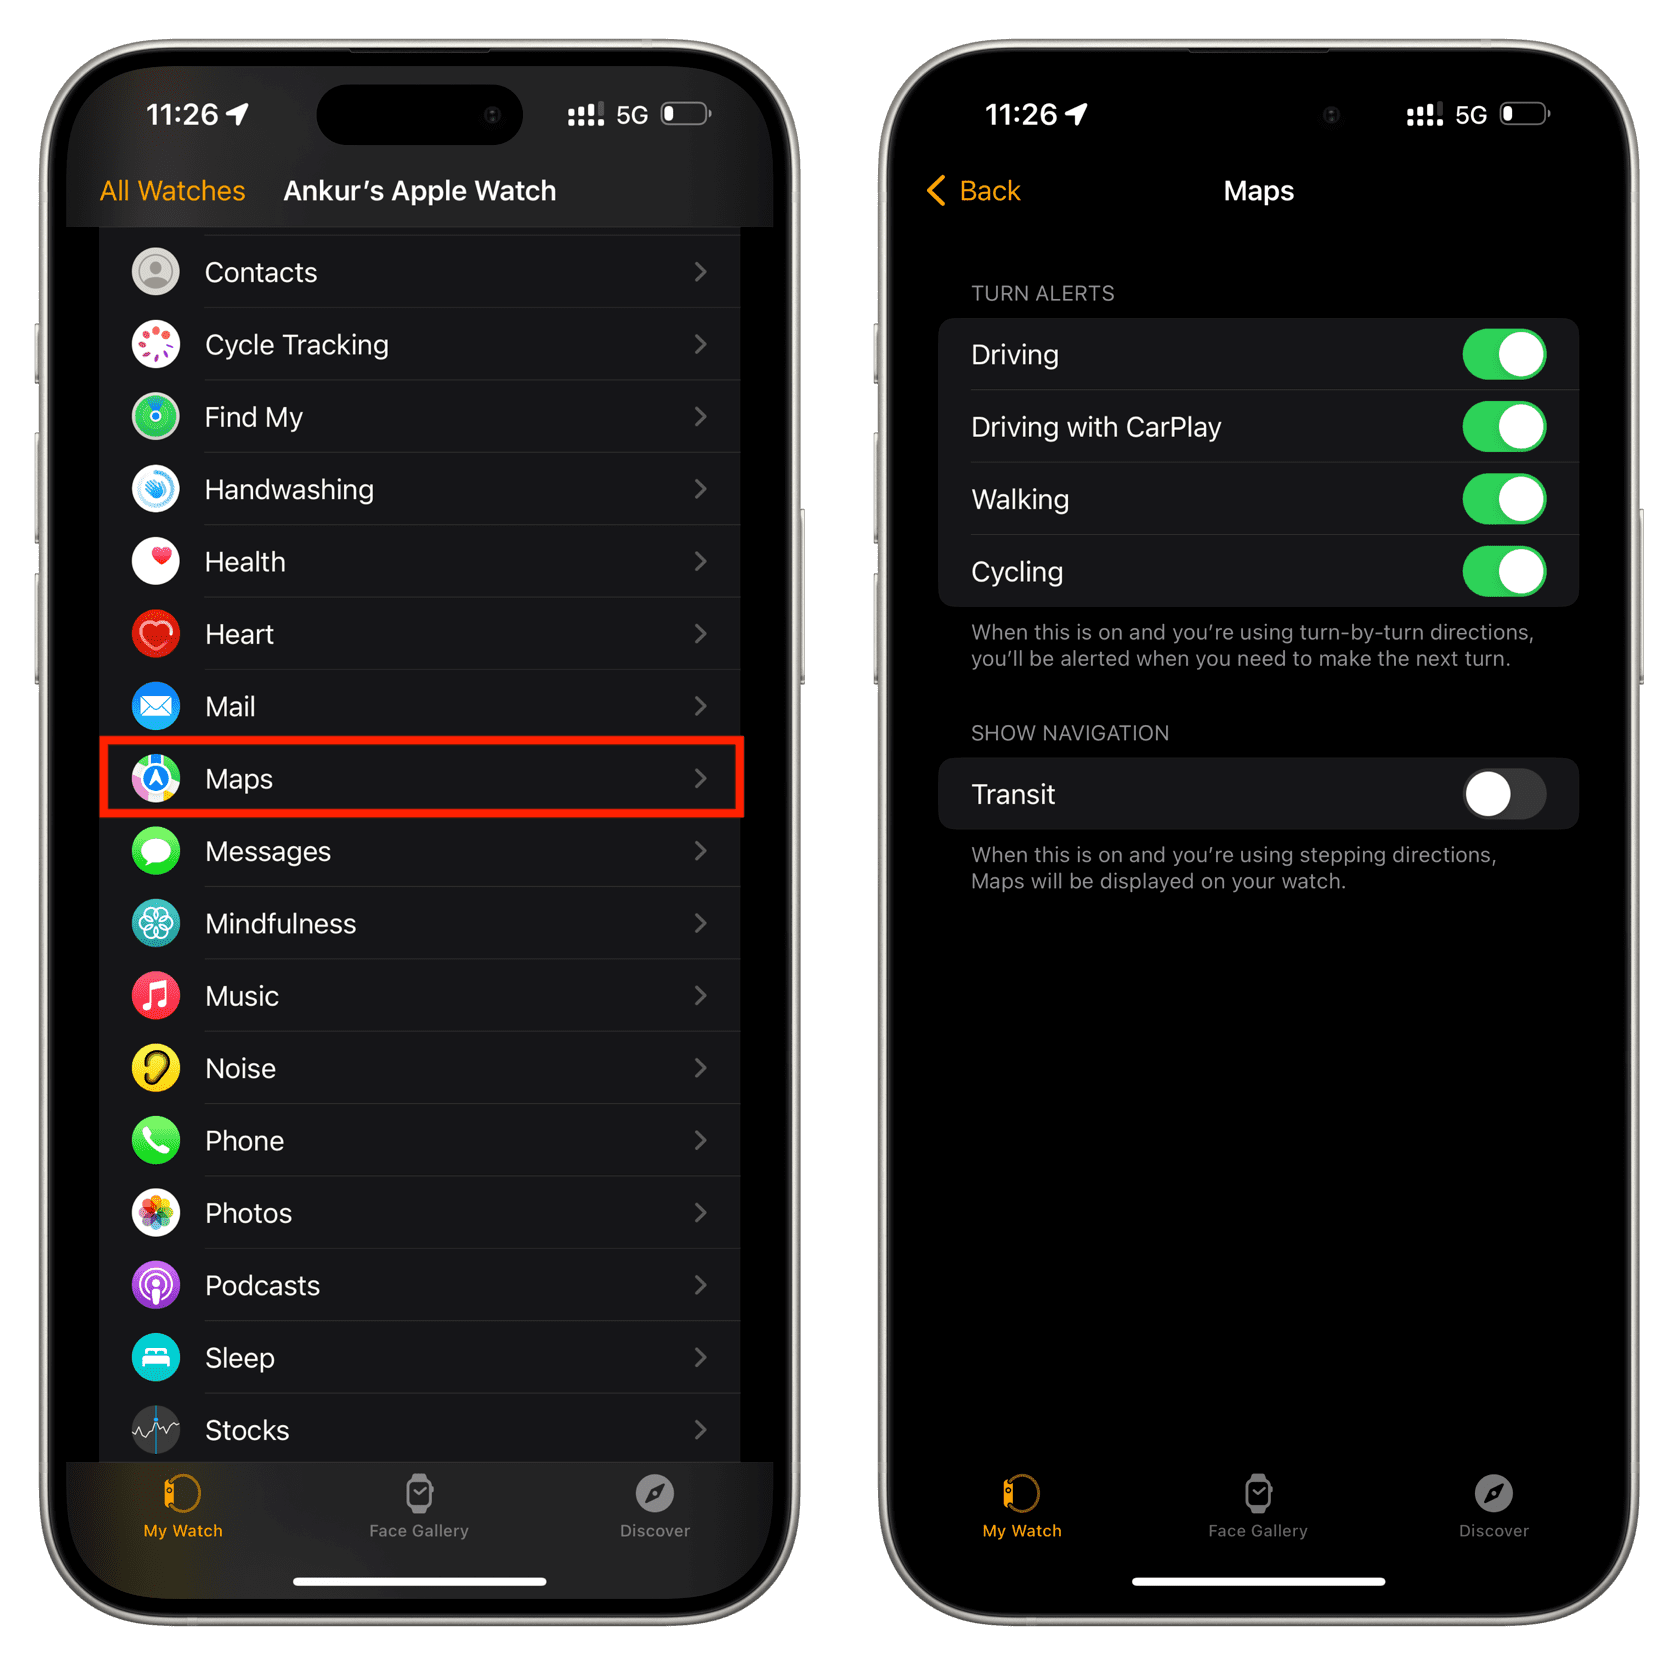 Turn Alerts for Maps app on Apple Watch